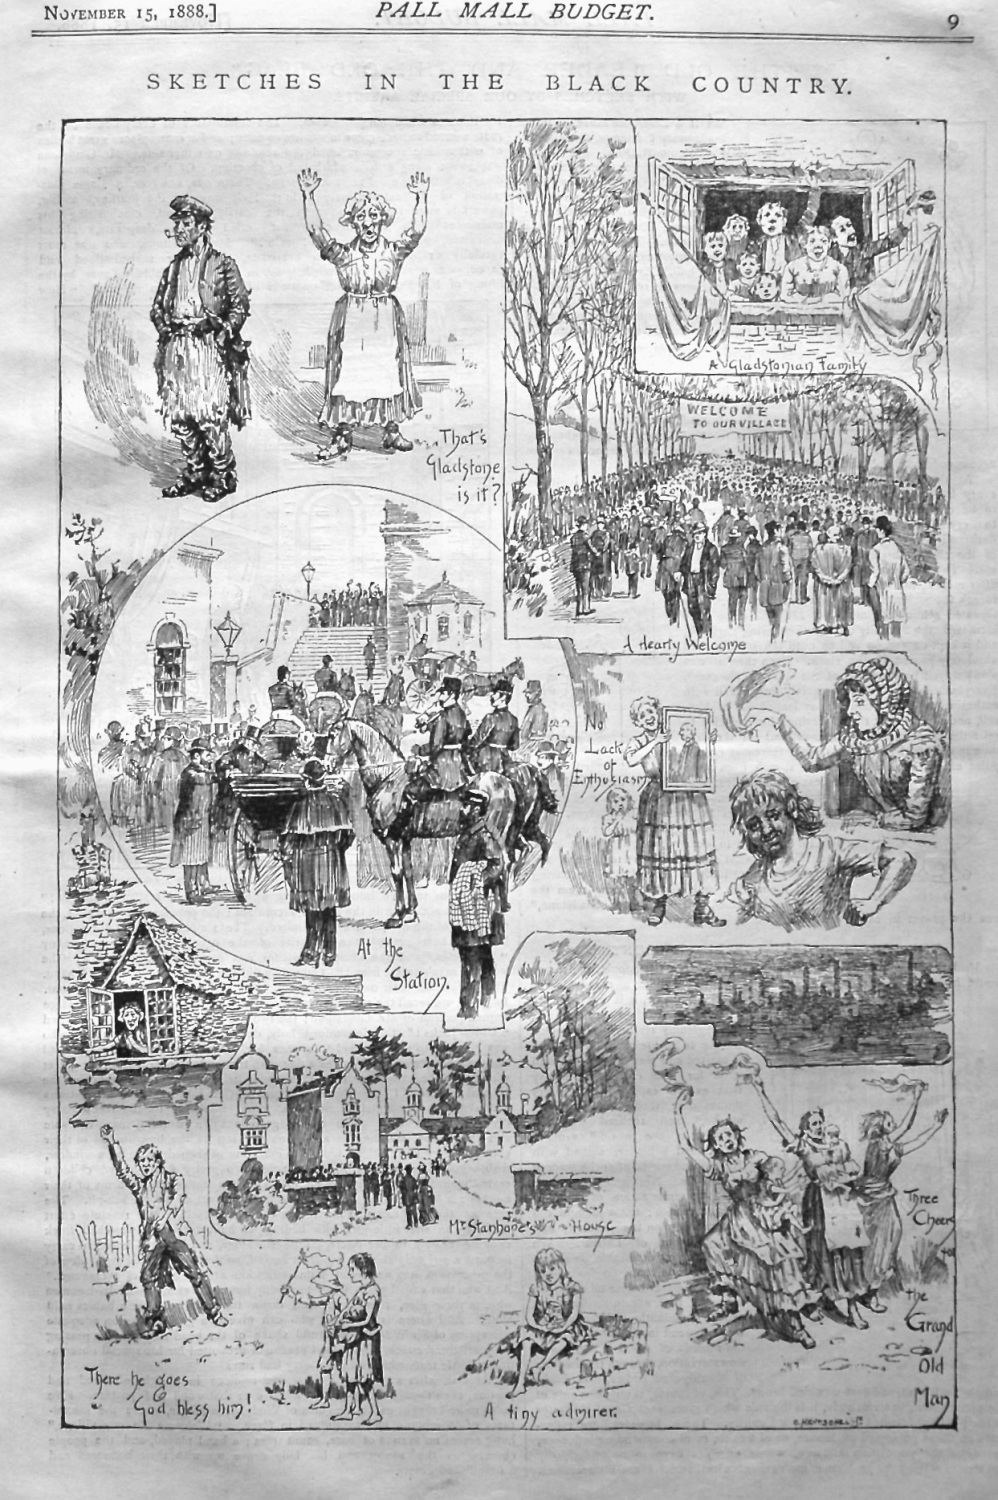 Sketches in the Black Country. 1888.